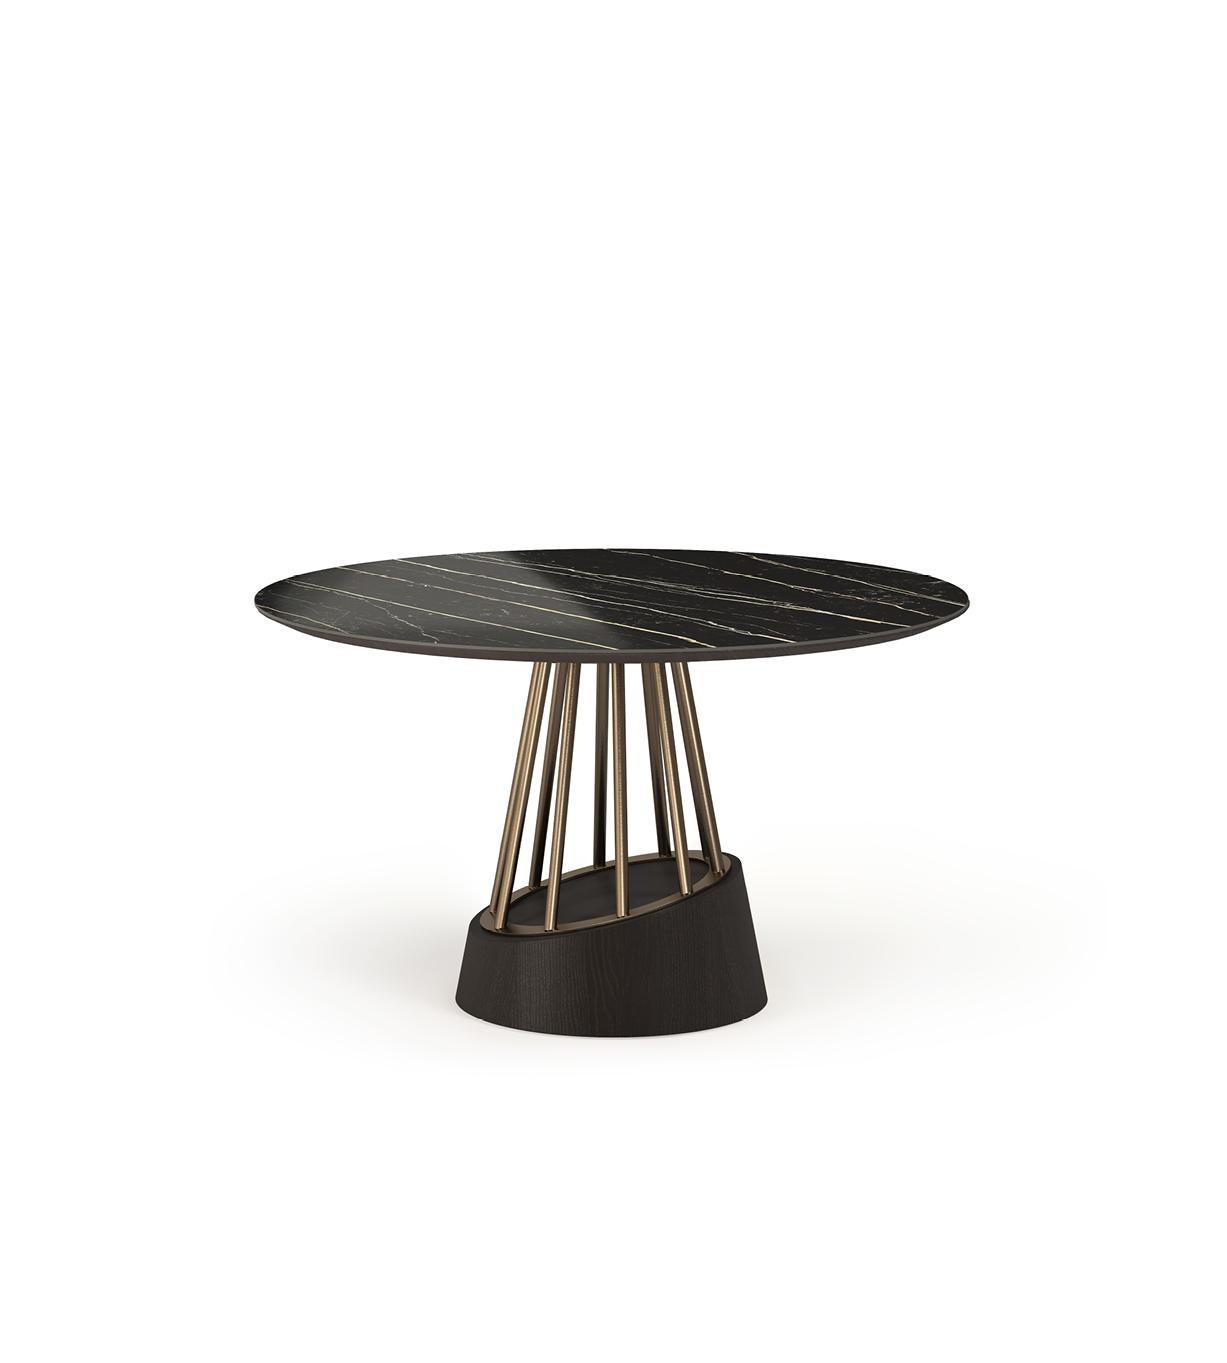 Soleil is an extravagant dining table with a contemporary design. This round dining table features a combination of wood, stainless steel and ceramic.